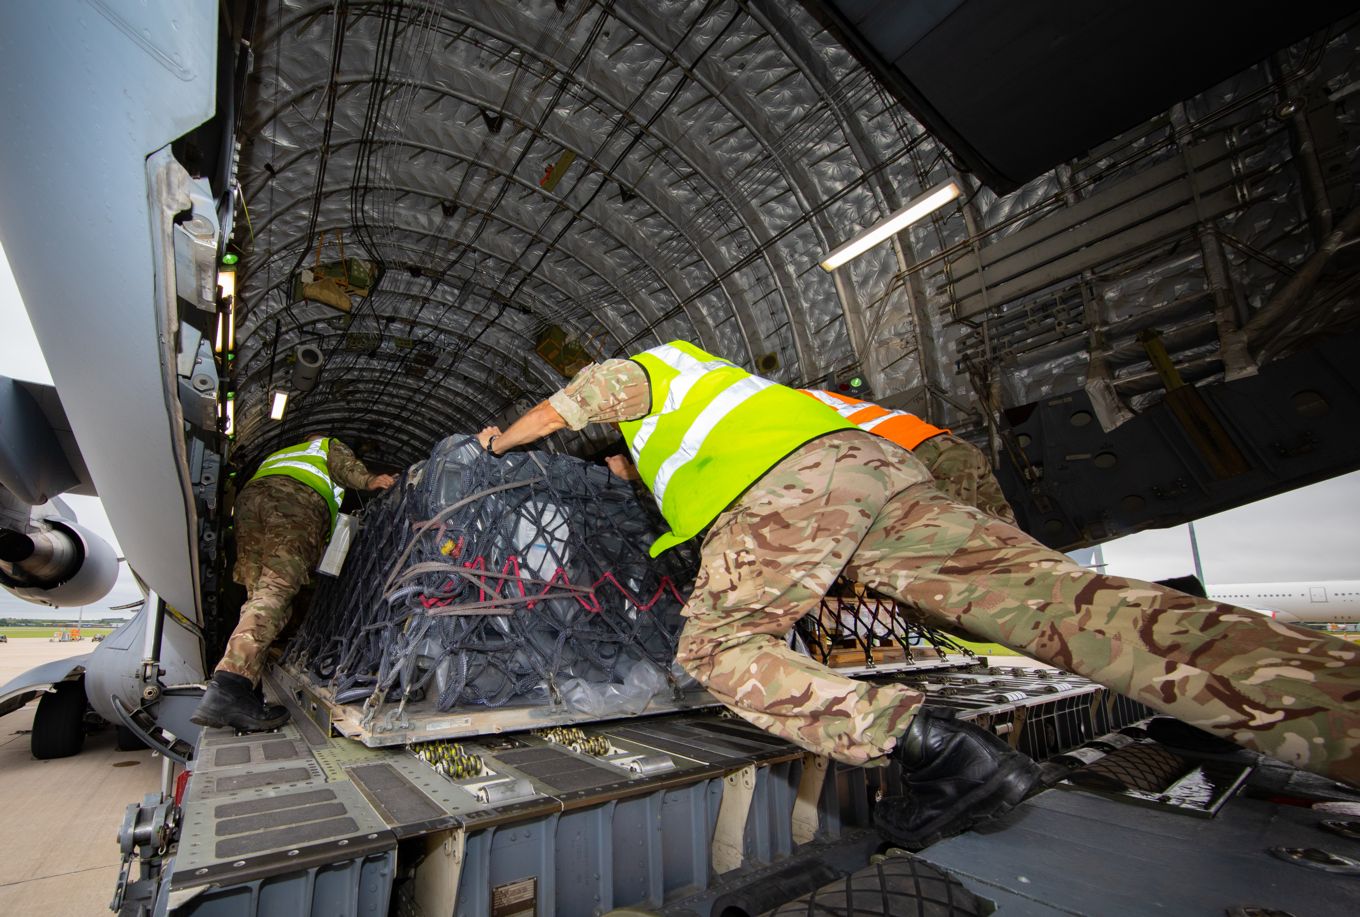 Within the RAF Logistics domain, numerous stakeholders have been planning and assisting the World Food Programme with the move of a temporary field hospital to Accra. 